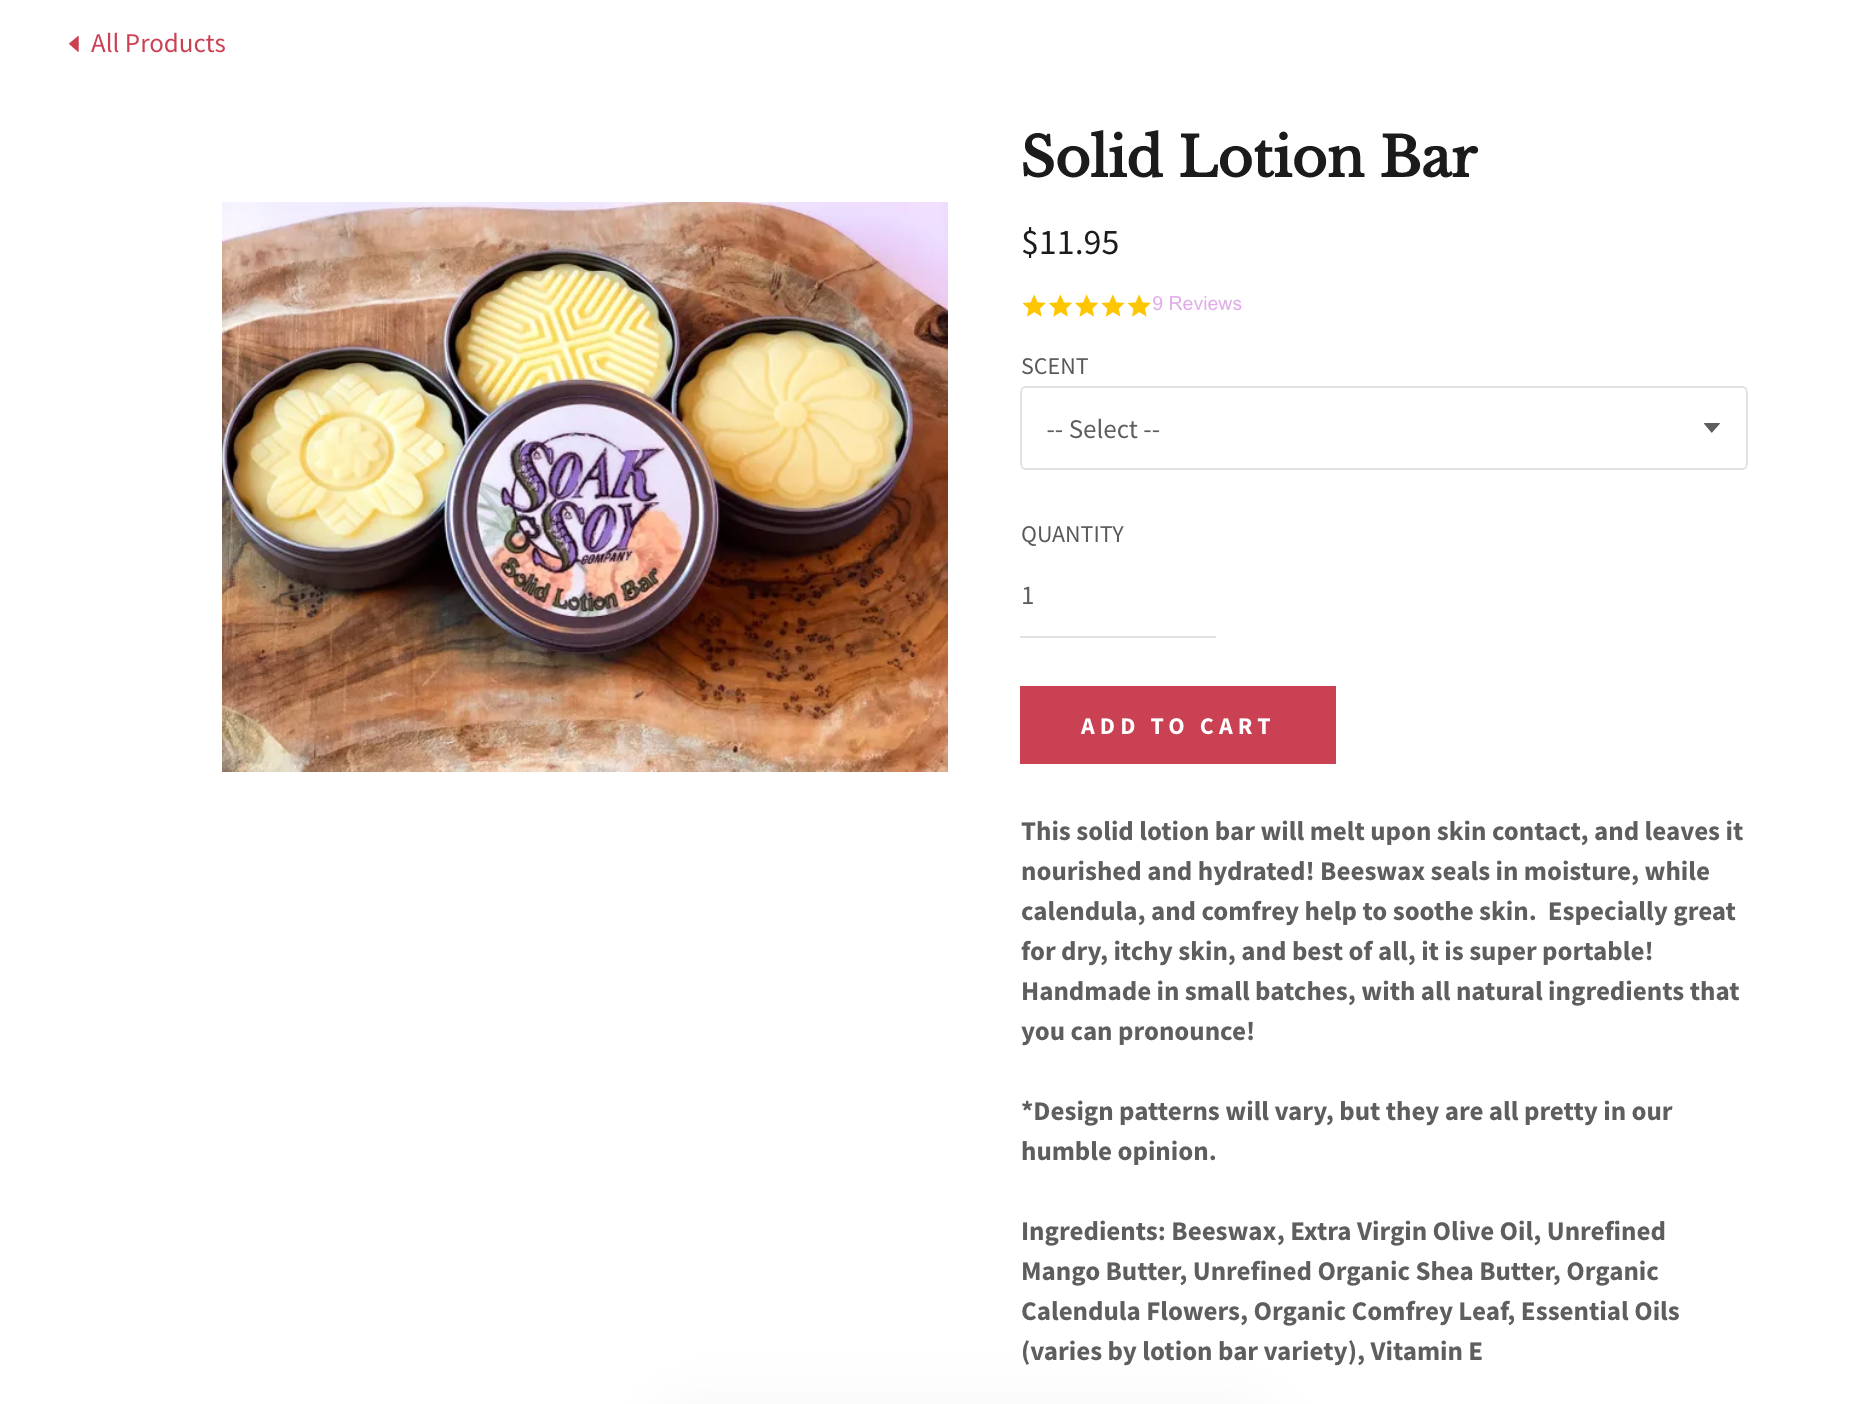 soak & soy solid lotion bar product page